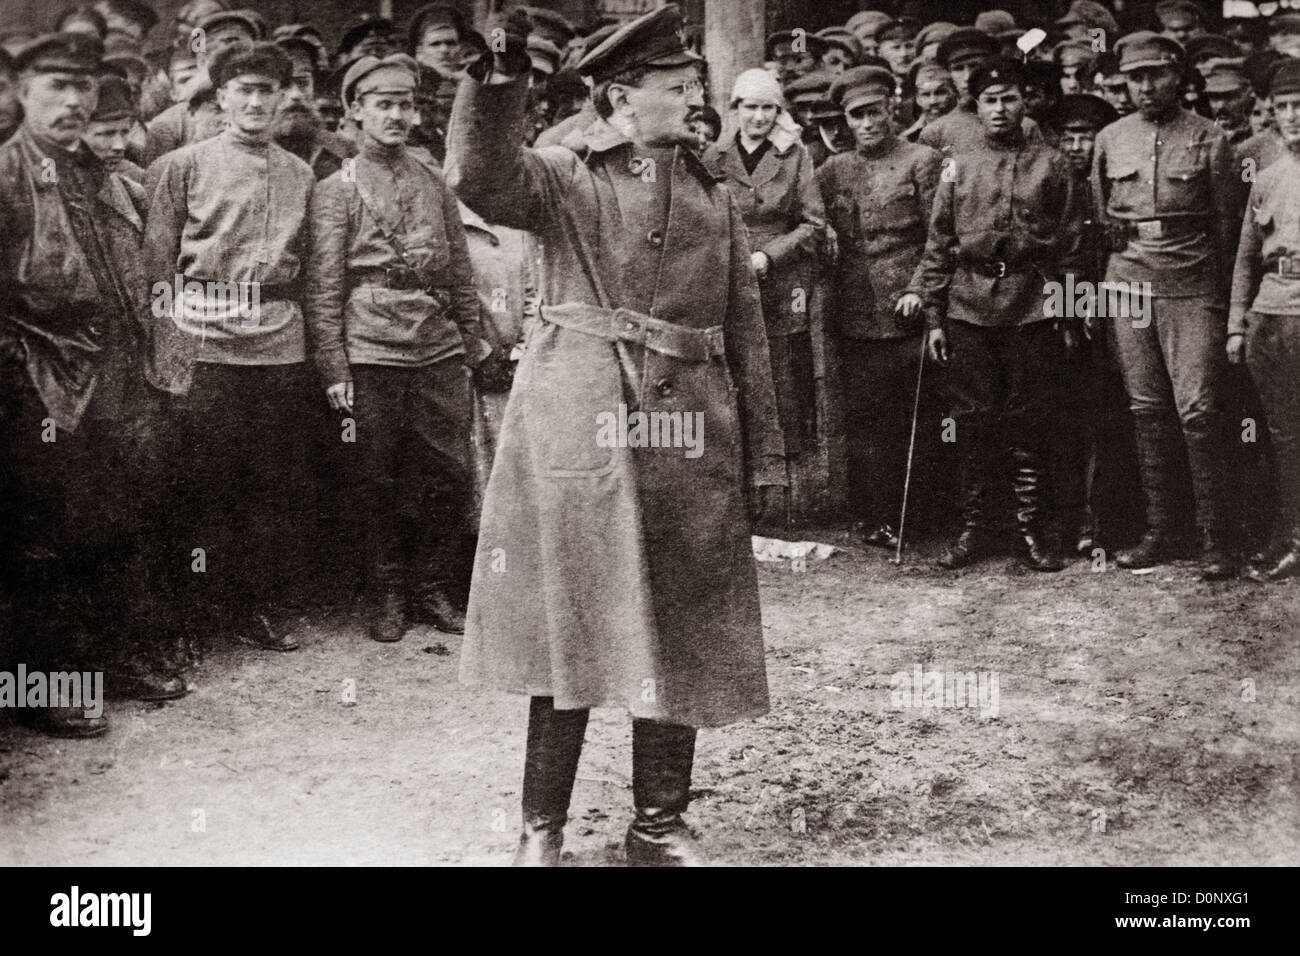 Leon Trotsky, head of the Red Army, addressed the Red Guard in 1918 during the Russian Civil War. Stock Photo